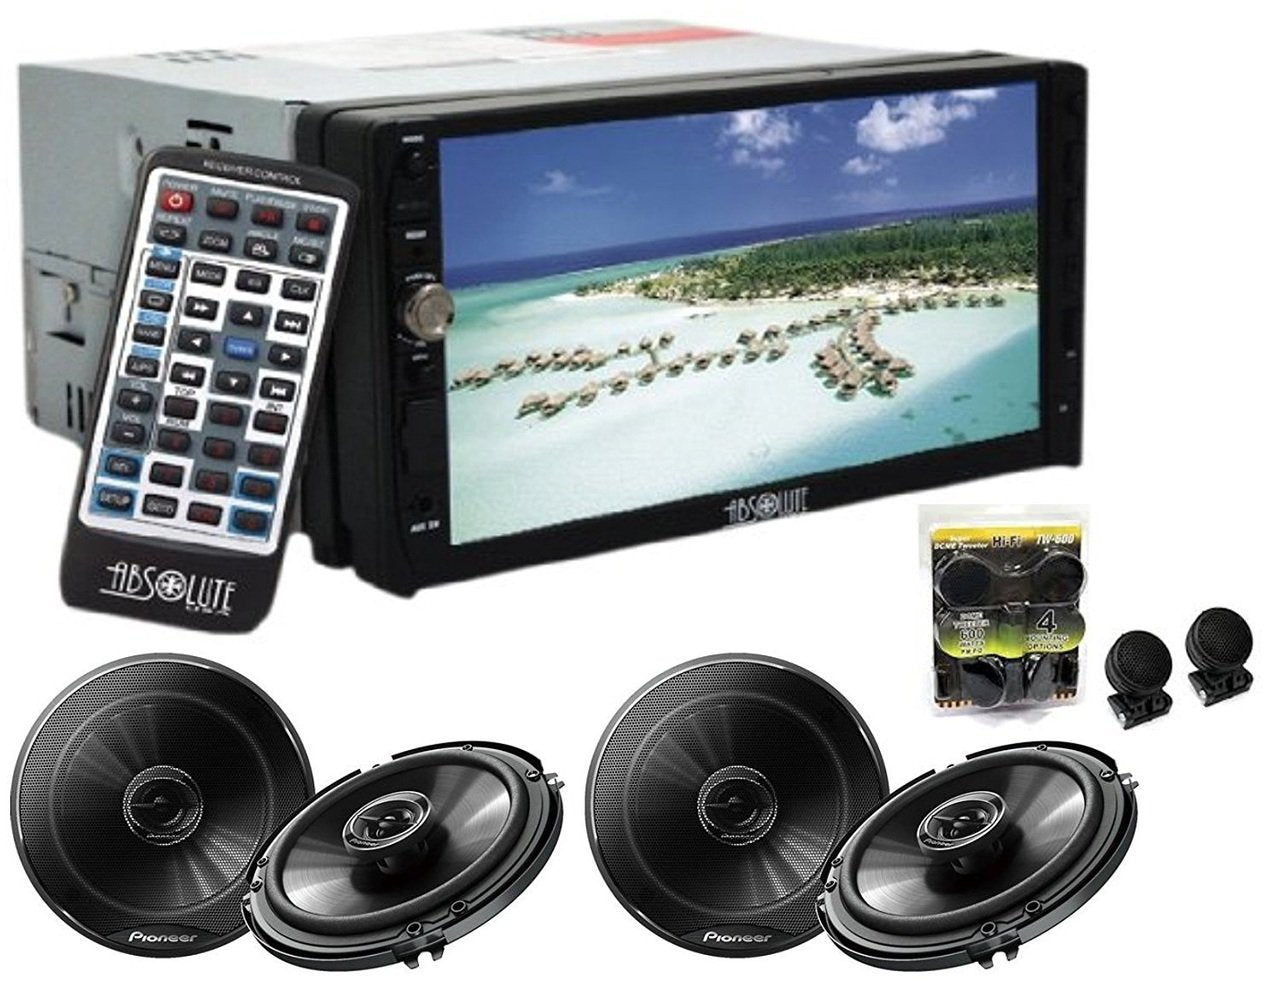 Absolute DD-3000ABT 7" Multimedia Receiver with 2 Pair Pioneer TS-G1620F 6.5" Speaker  TW600